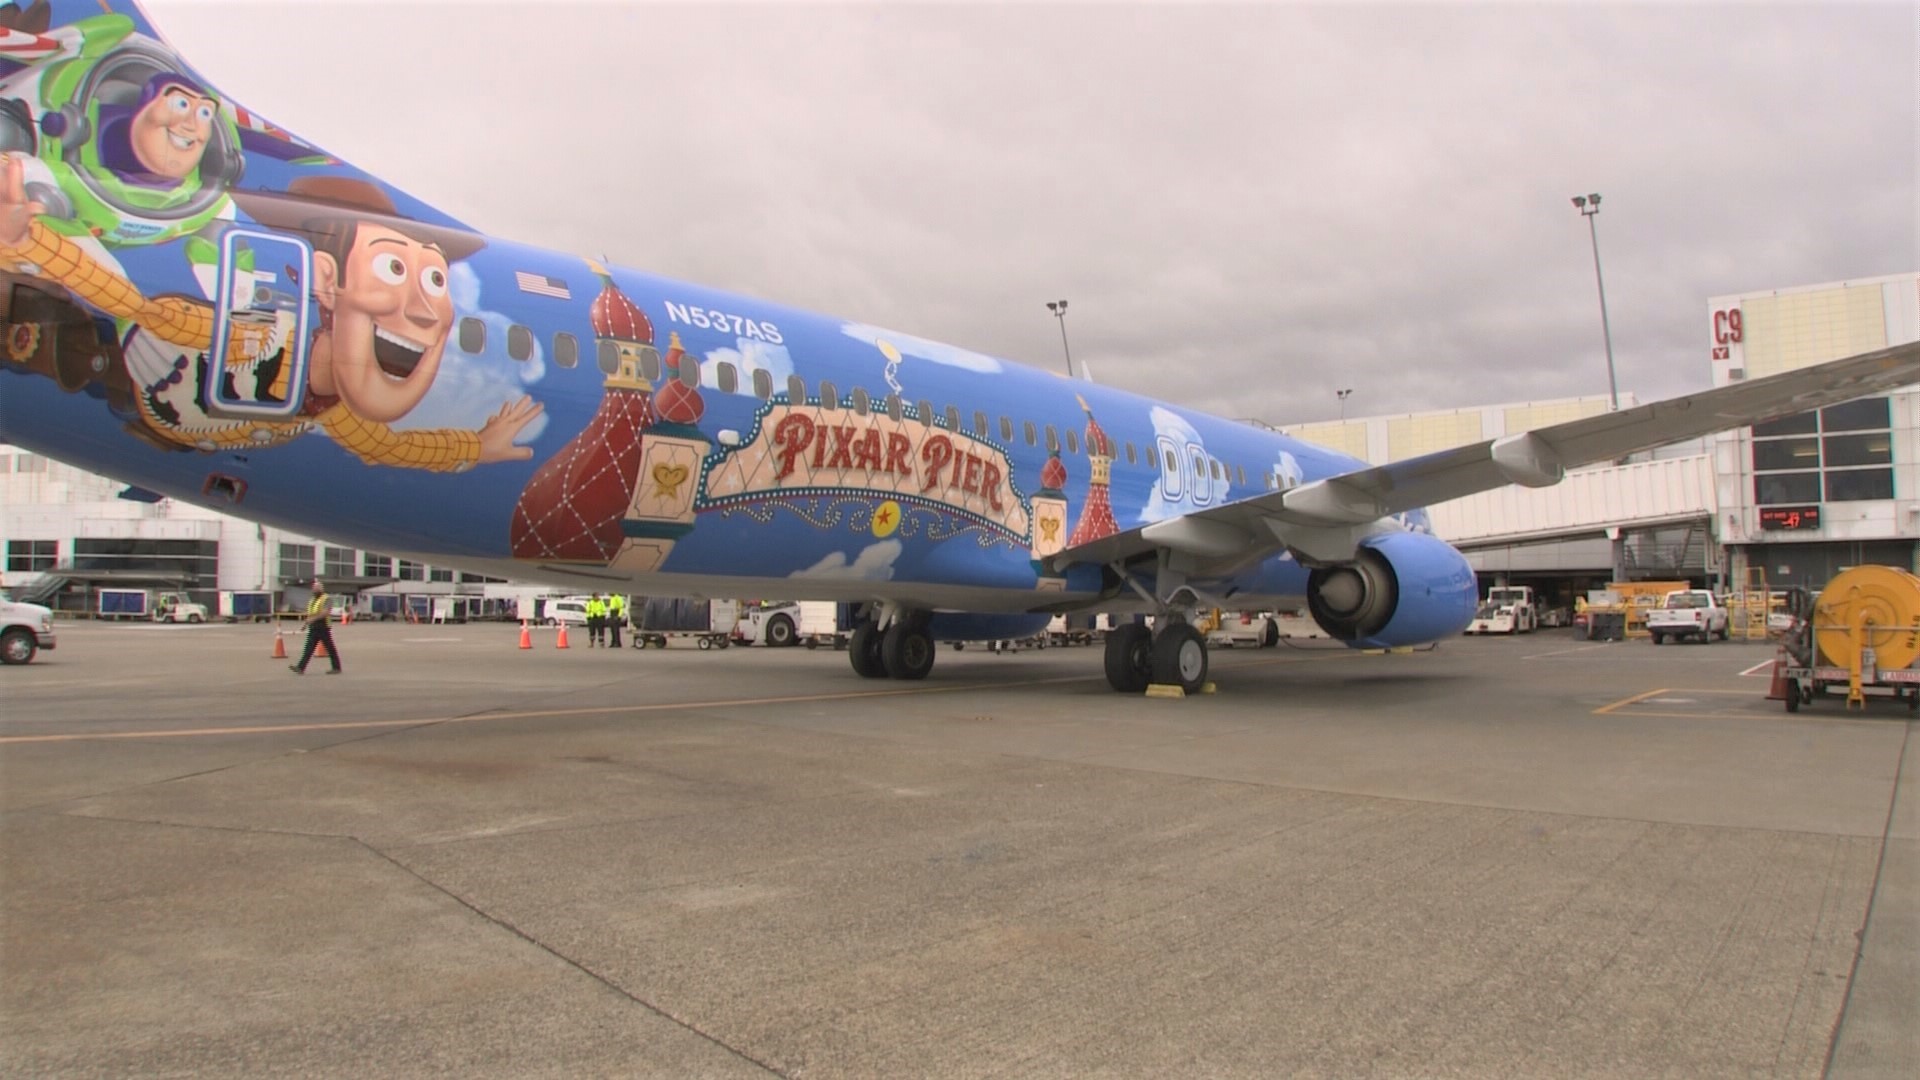 The plane takes its first-ever passengers to the Happiest Place on Earth